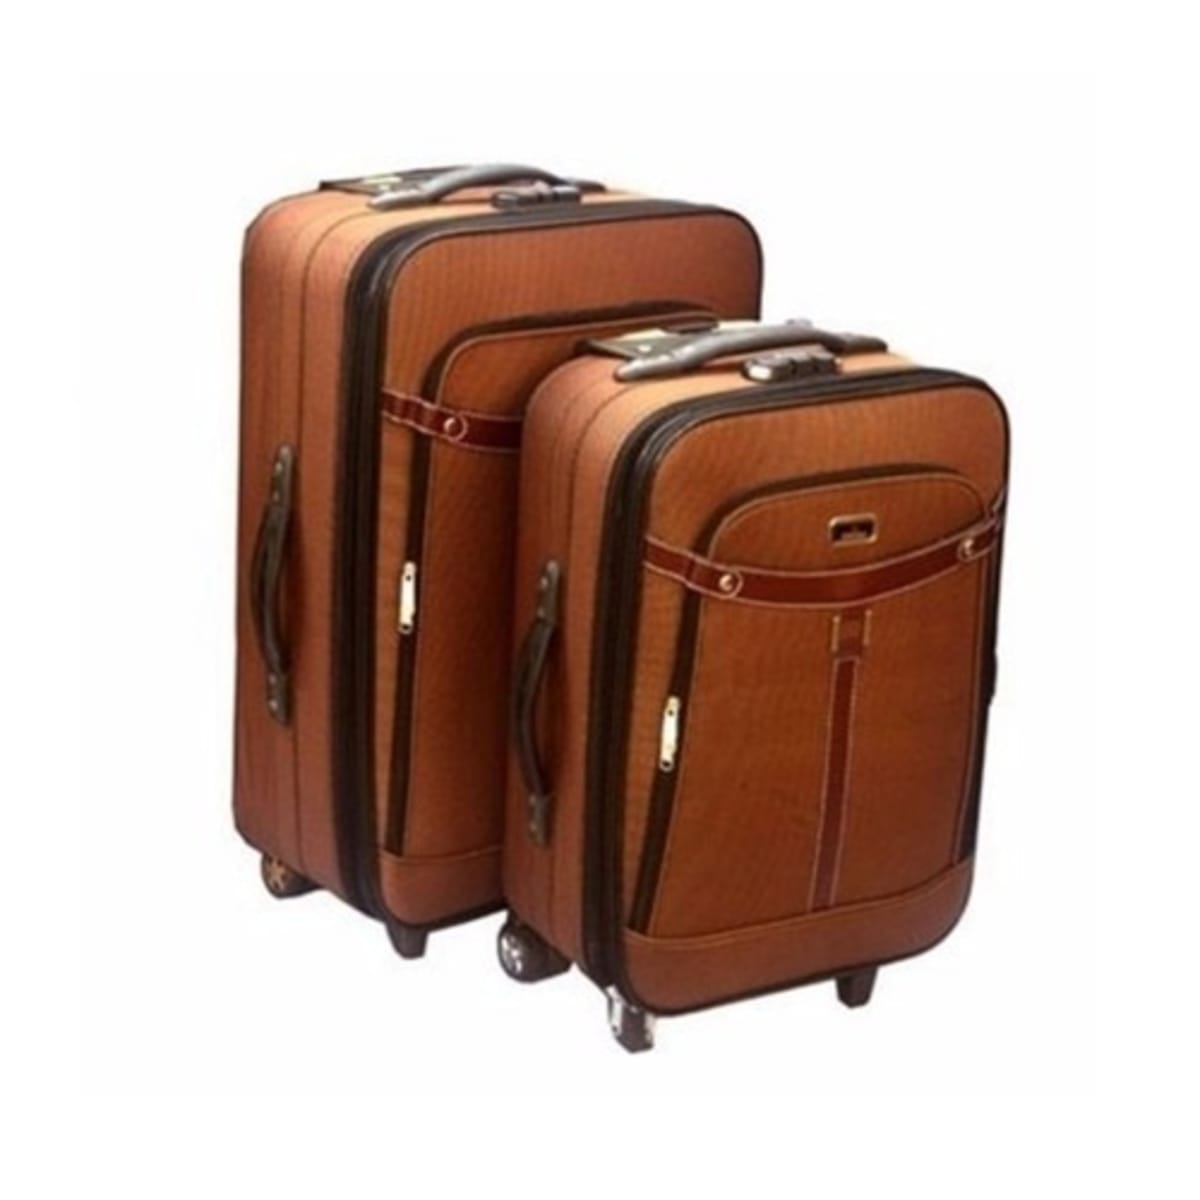 Luggage For Sale in South Africa | Junk Mail